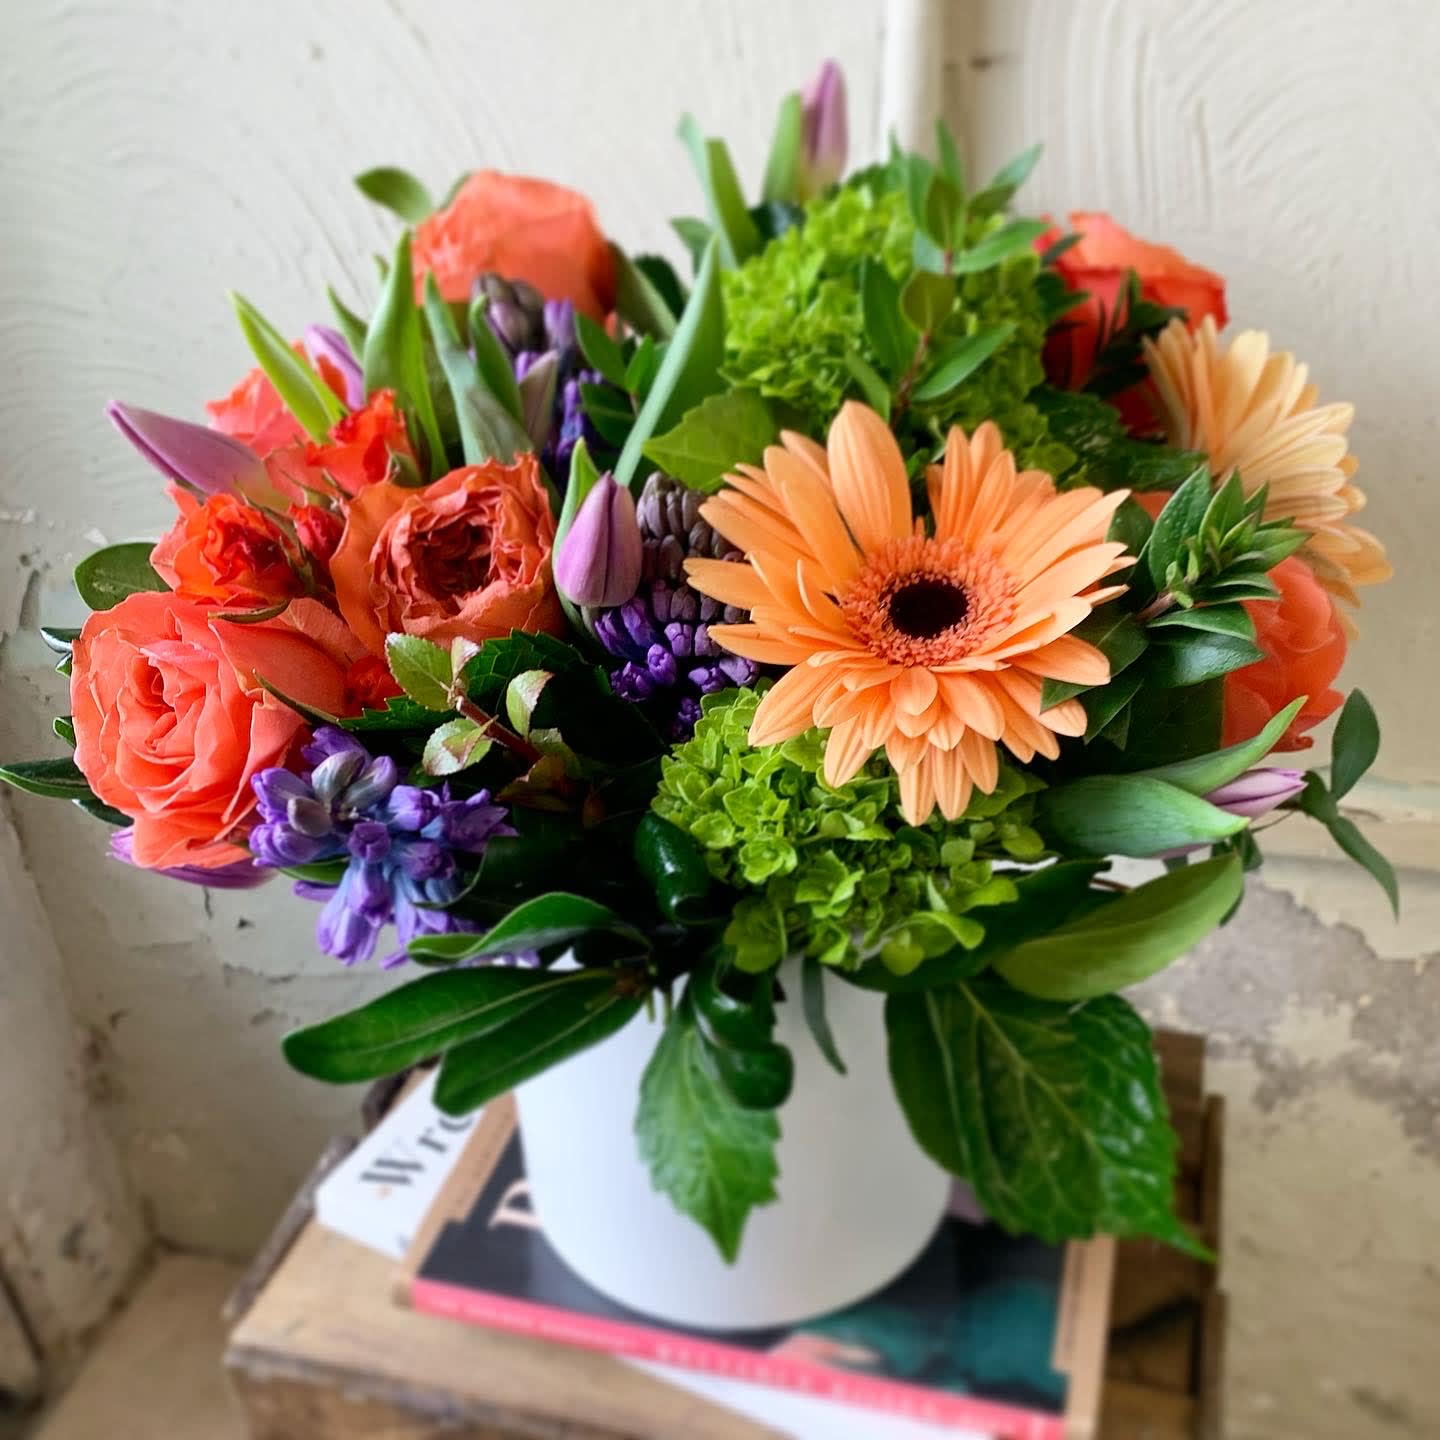 Coral Springs - Coral and Orange assorted blooms complimented with purple hues in 6x6 container